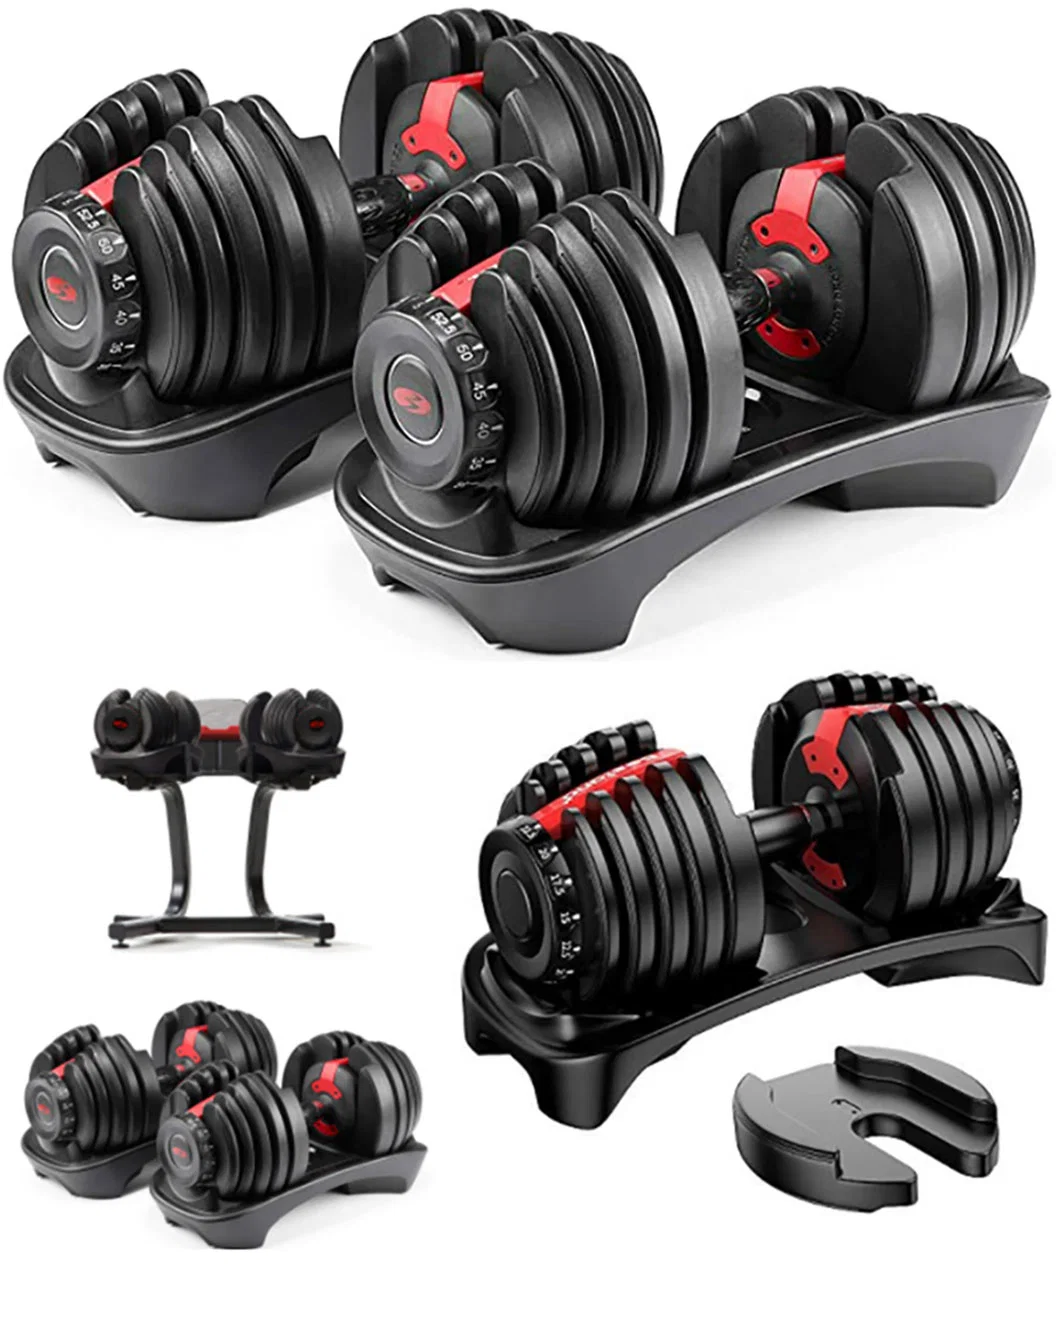 Women Gym Free Weights Fitness 5 Kg Adjustable Dumbbell Set for Home Gym Exercise Body Building